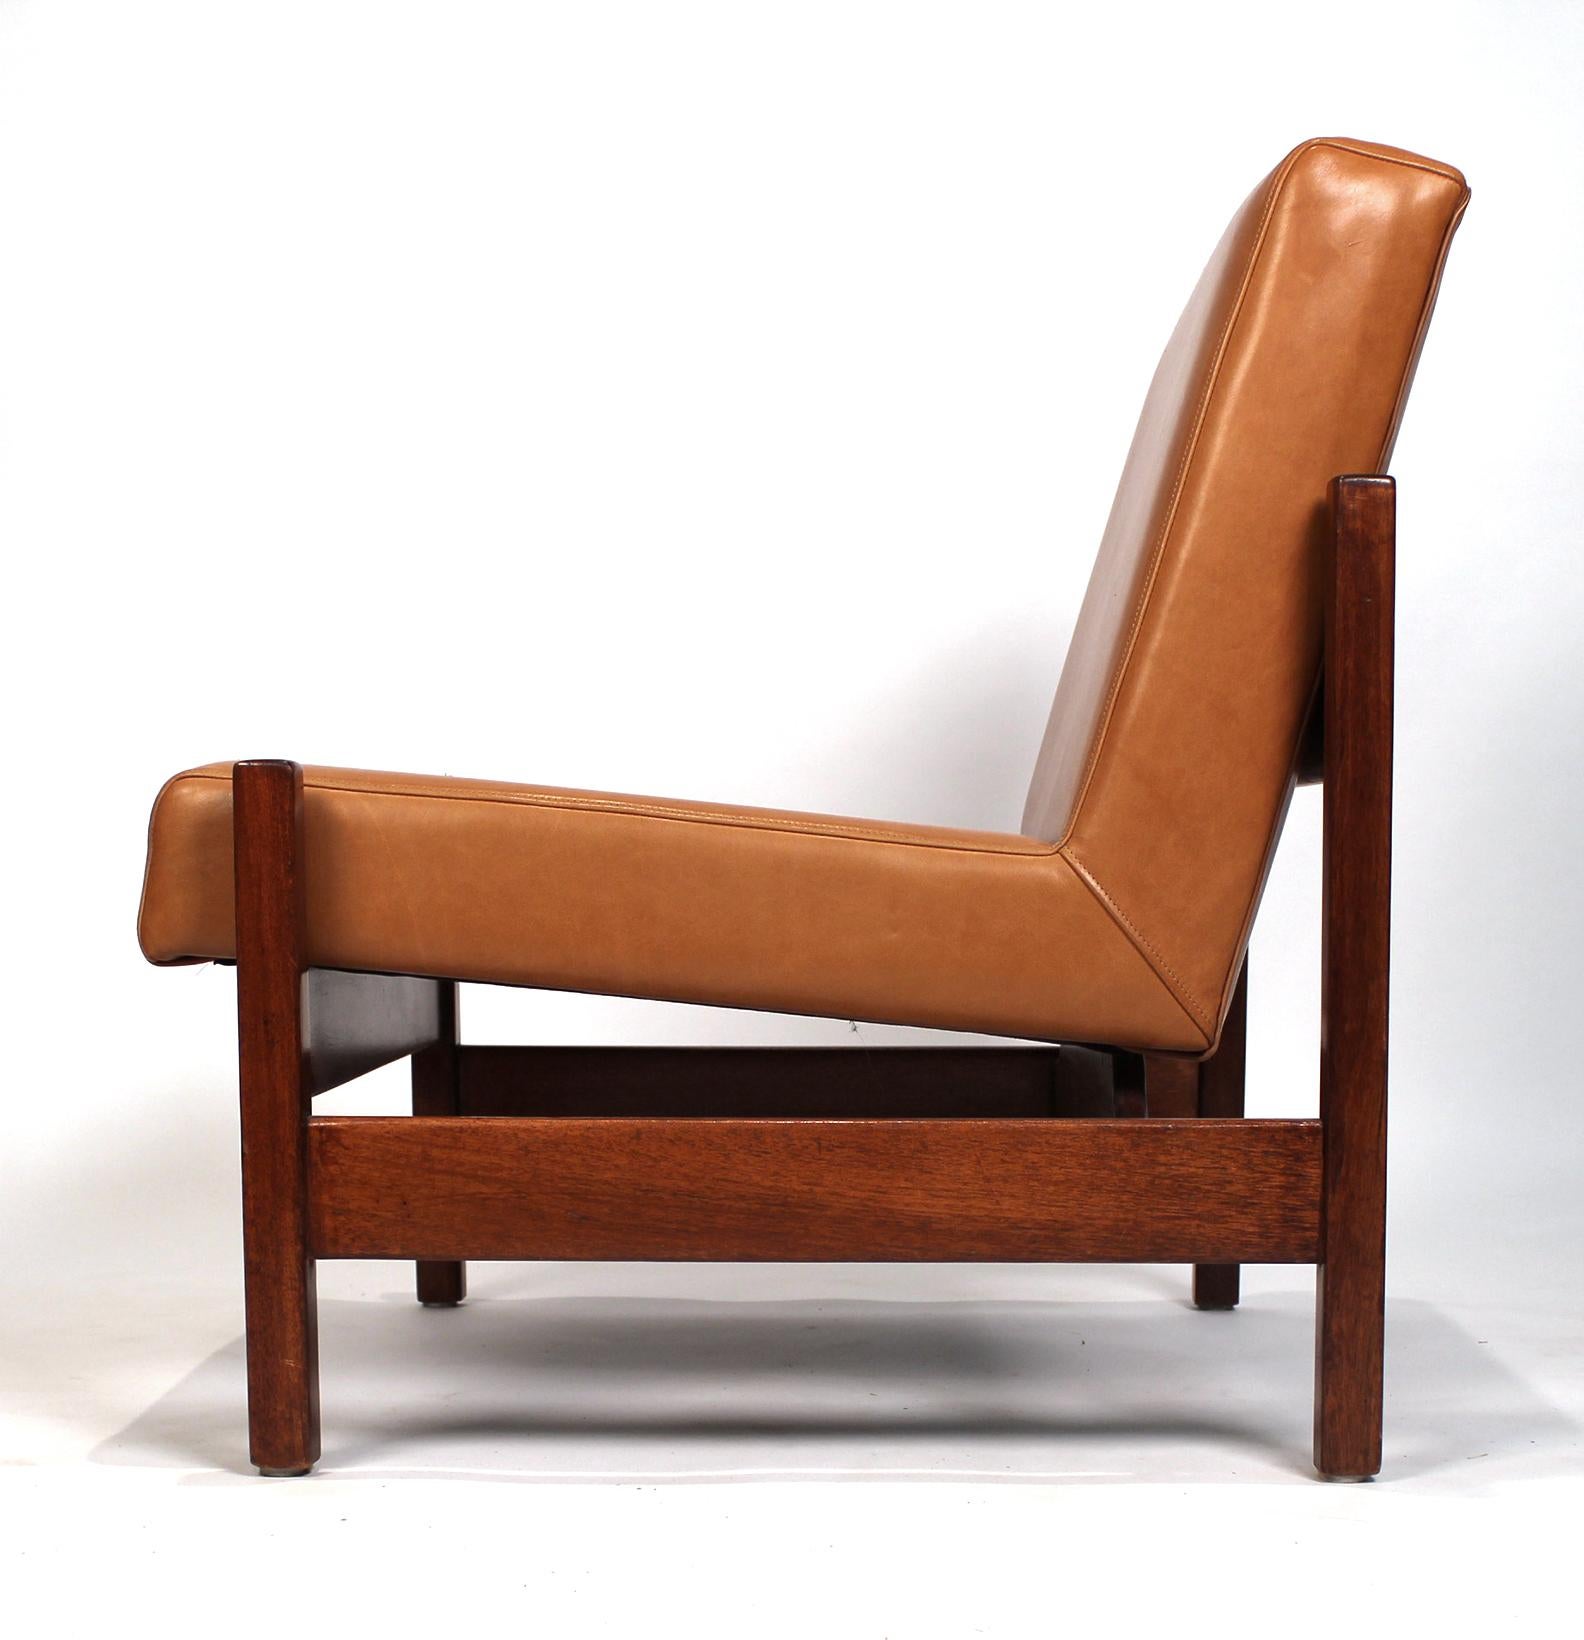 Mid-20th Century Joaquim Tenreiro Style Peroba Lounge Chairs in leather for Knoll & Forma Brazil